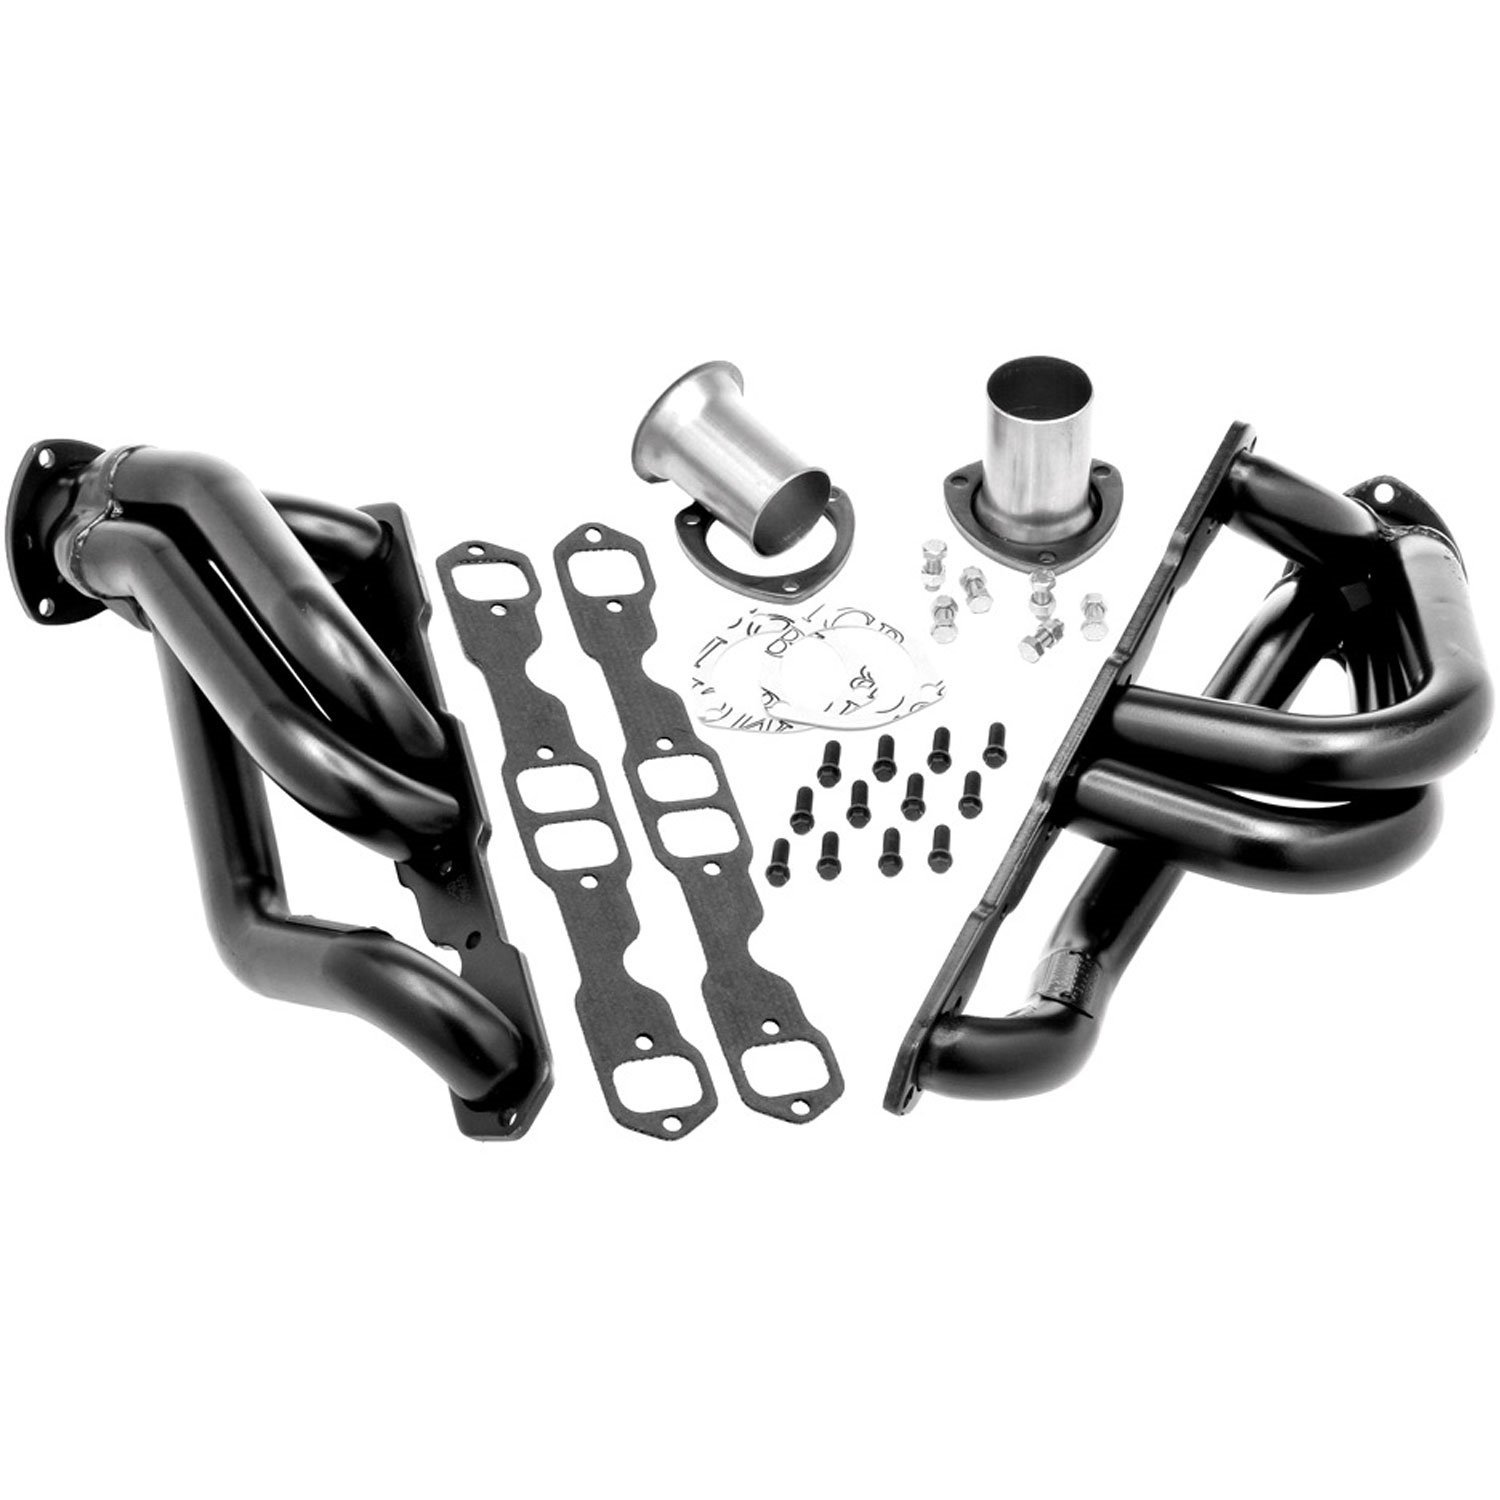 Engine Swap Headers 1982-2000 S10 with Small Block Chevy